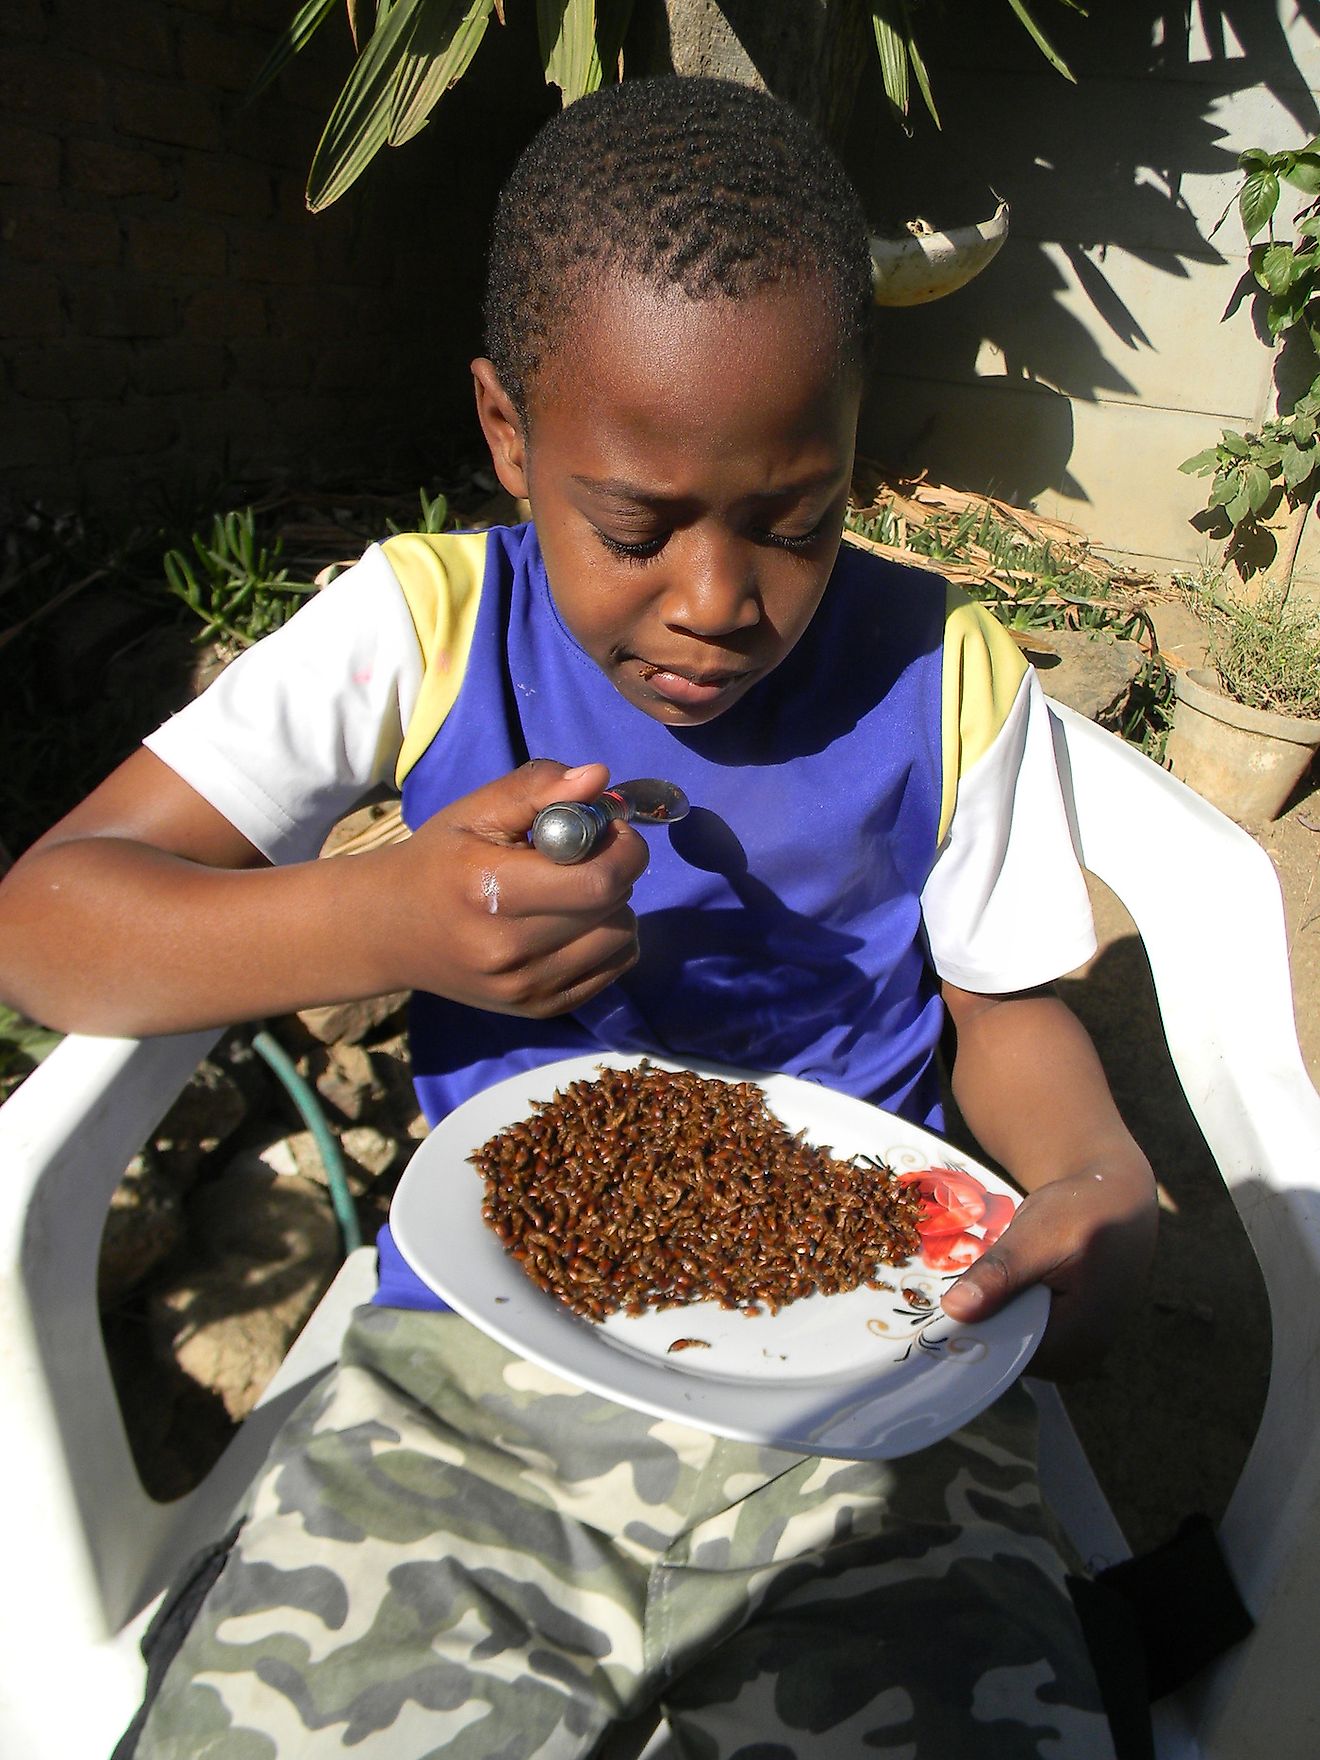 African boy eating dried termites which are a popular delicacy in many African countries. Image credit: CECIL BO DZWOWA/Shutterstock.com